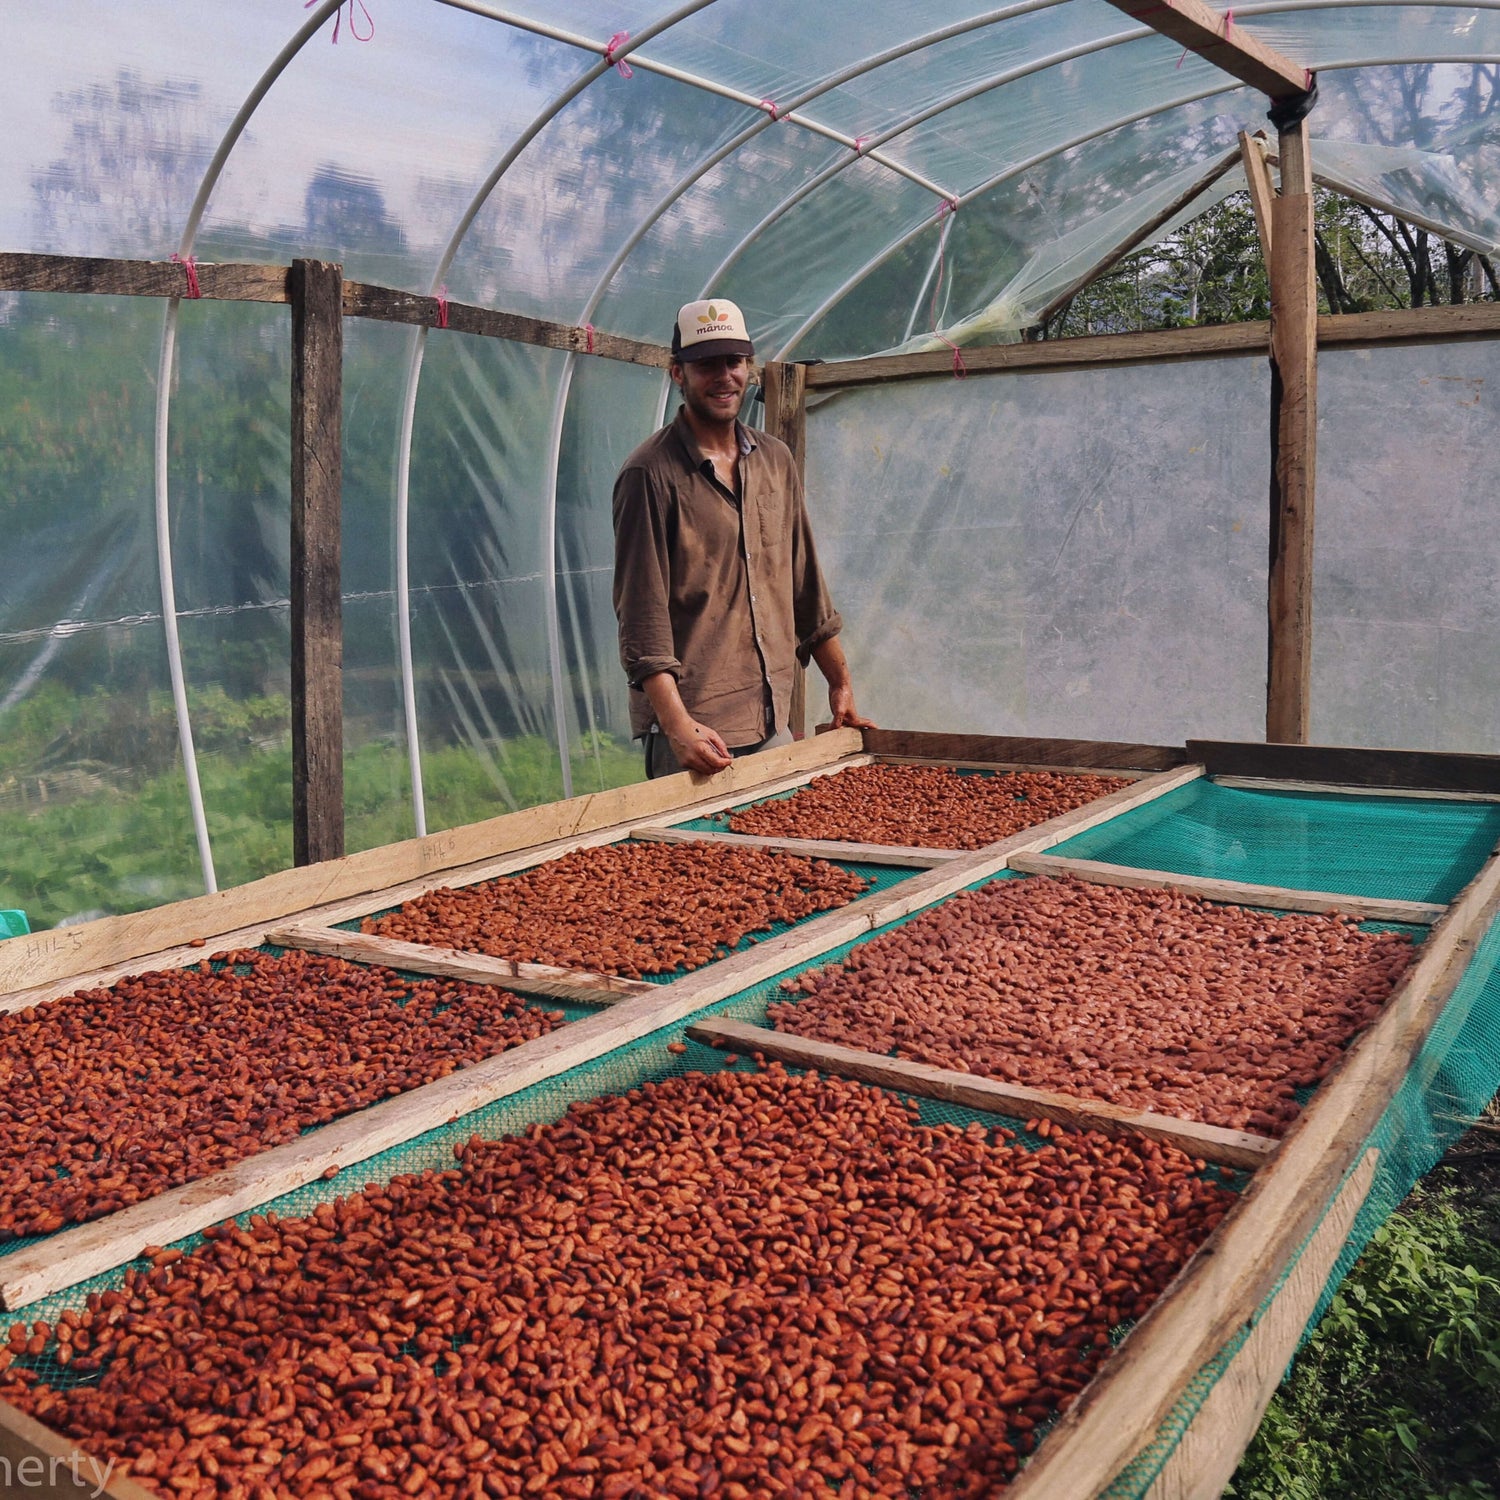 Man standing among dried cacao bean